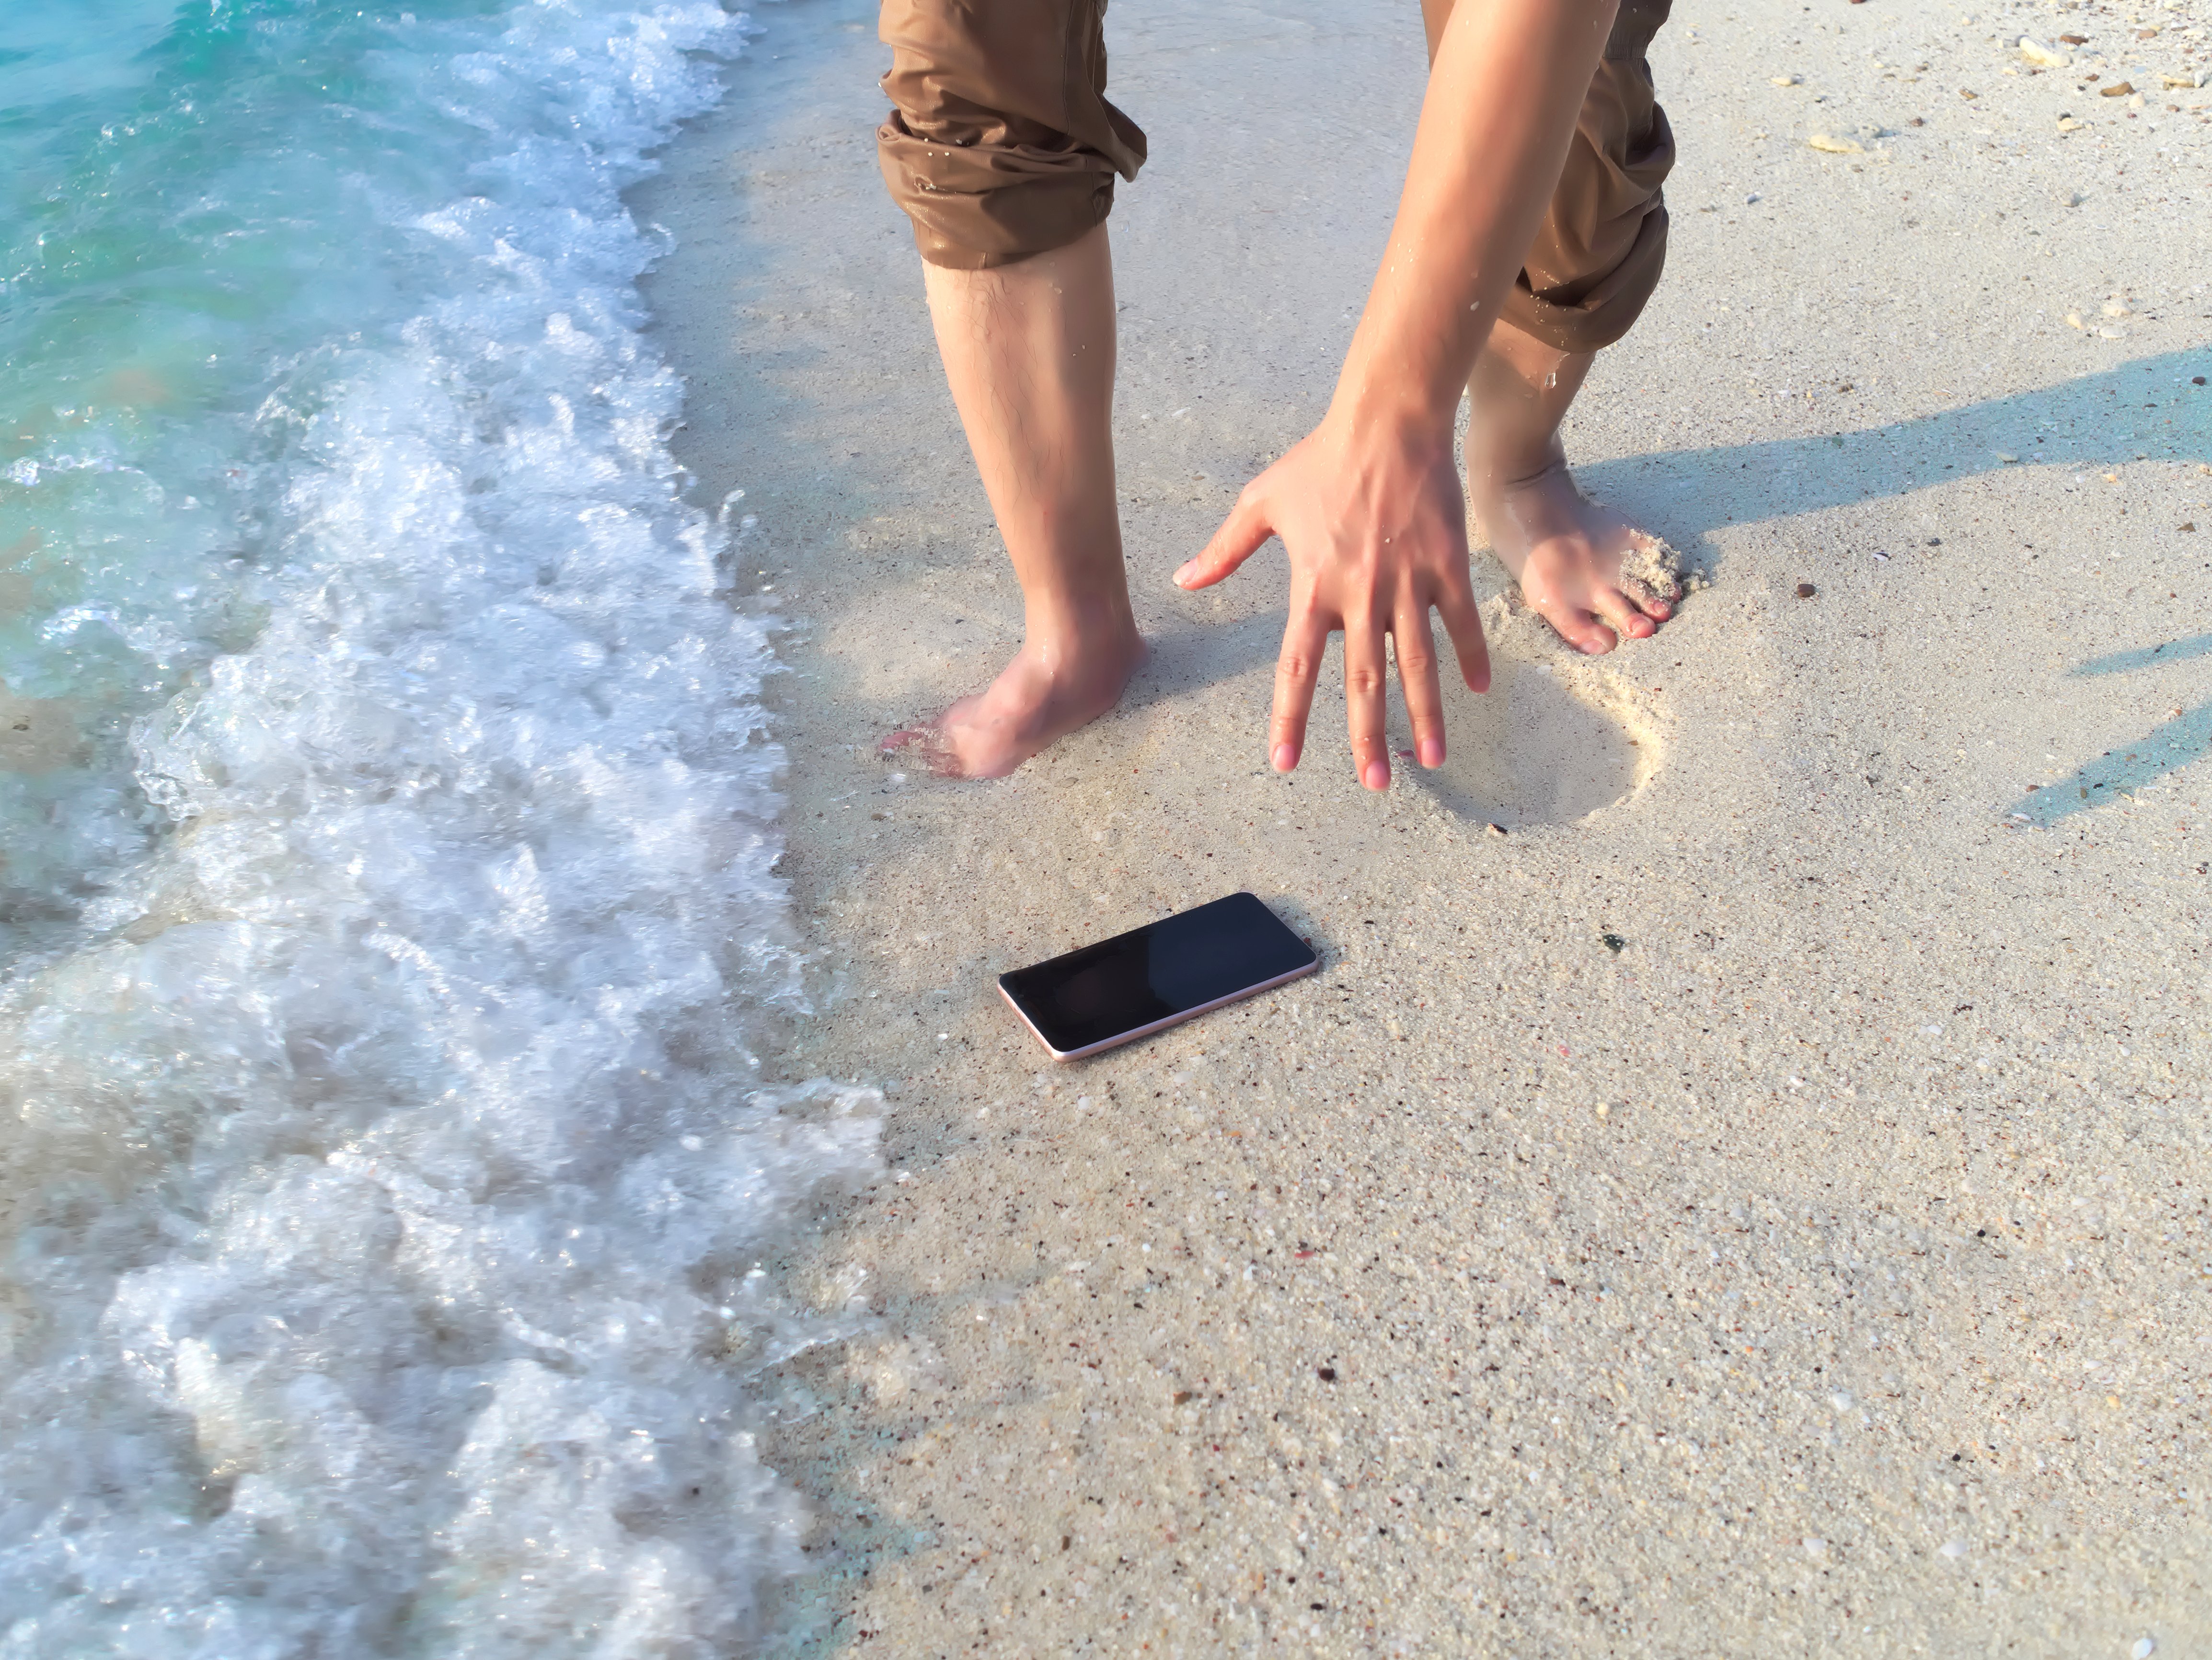 Smartphone troubleshooting: what to do if you drop your phone in water